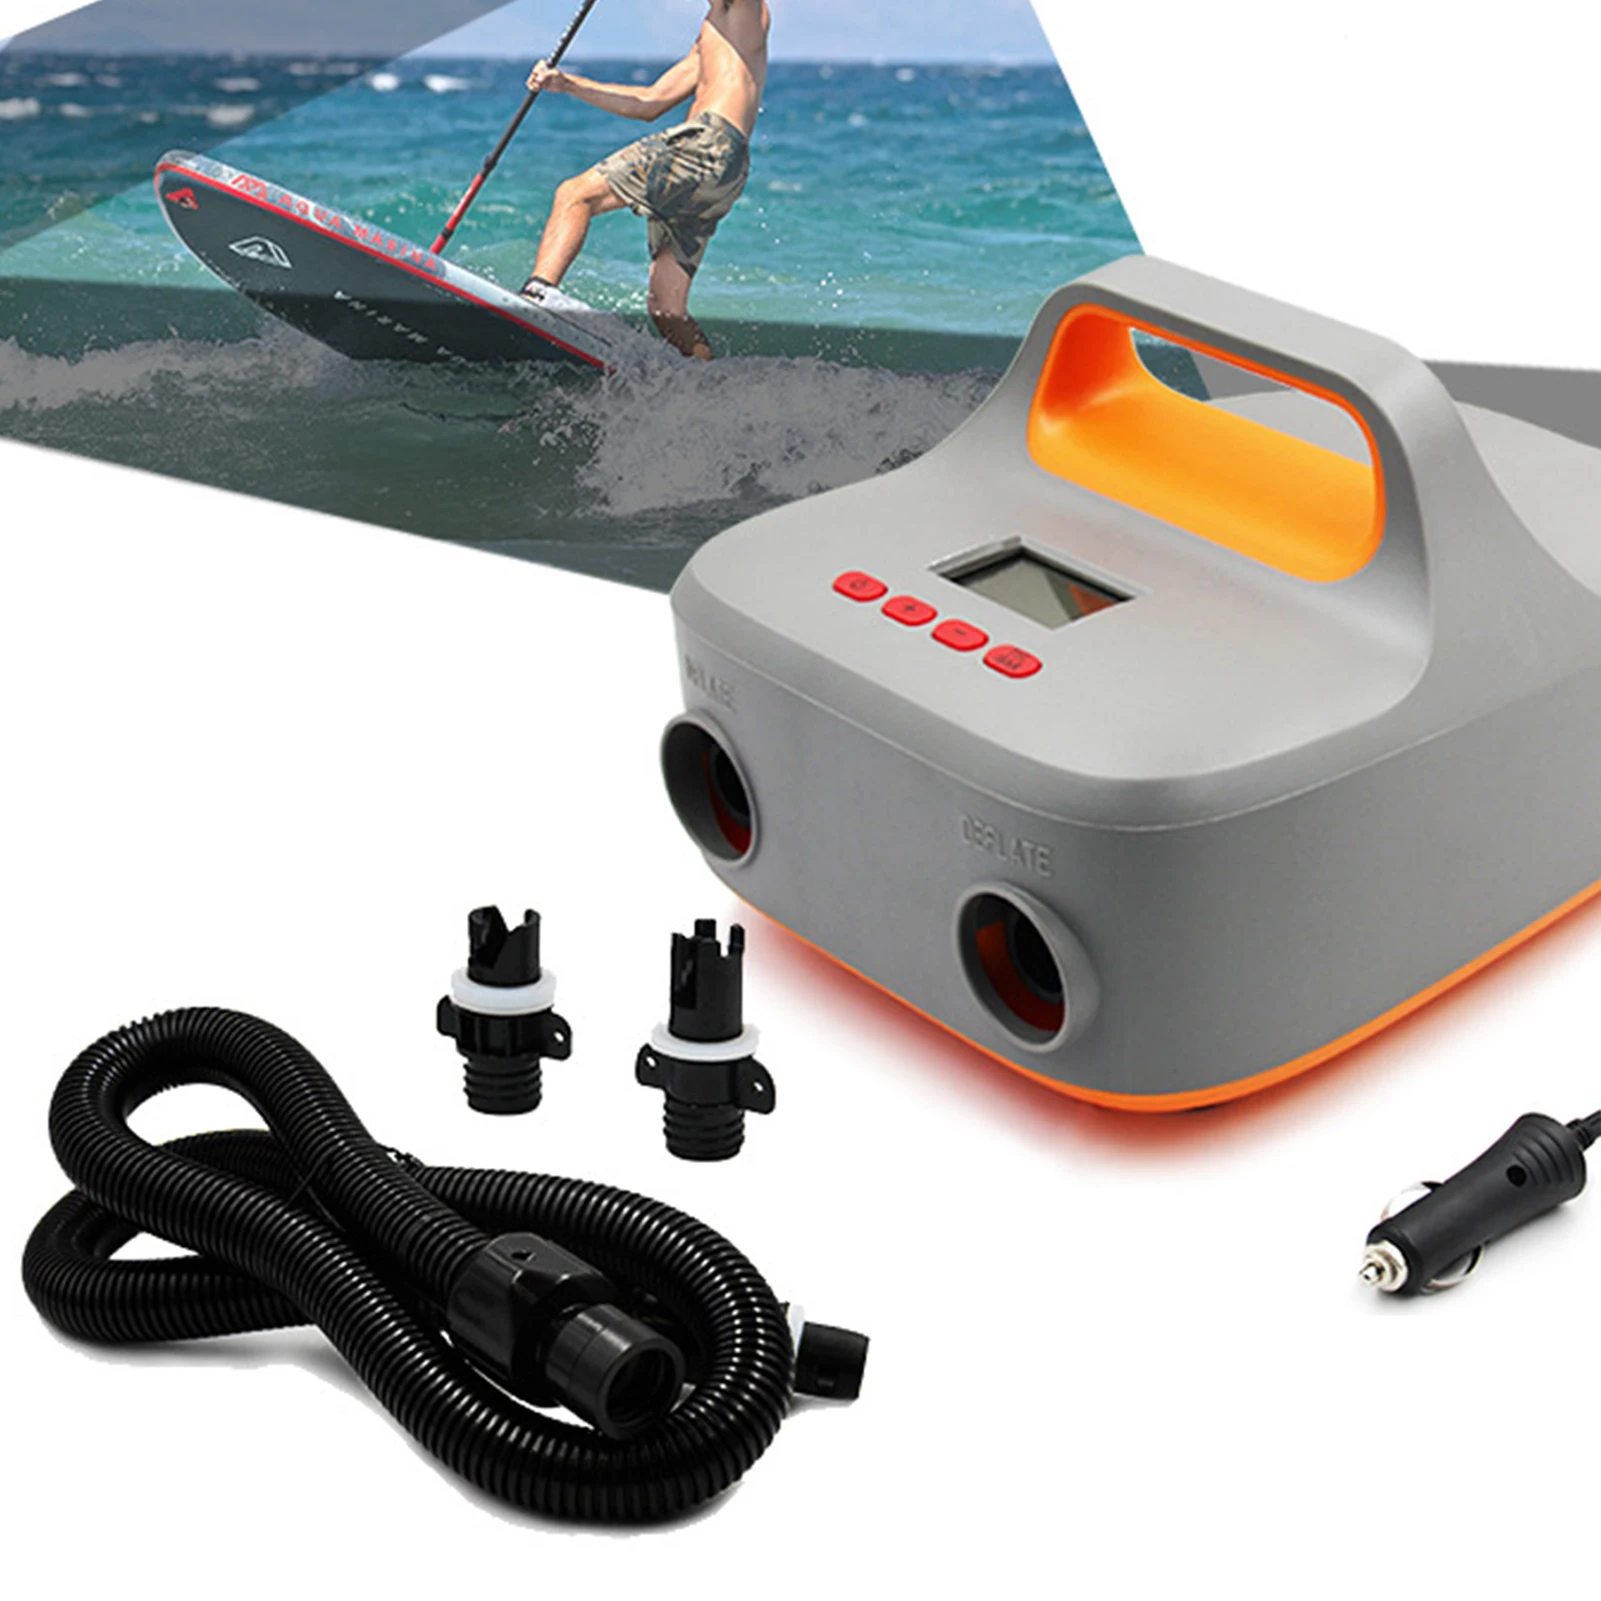 Digital Electric SU P Air Pump 140W 12 Volt 20PSI Quick Air Inflator with LCD Display for Water Sports Stand Up Paddle Board